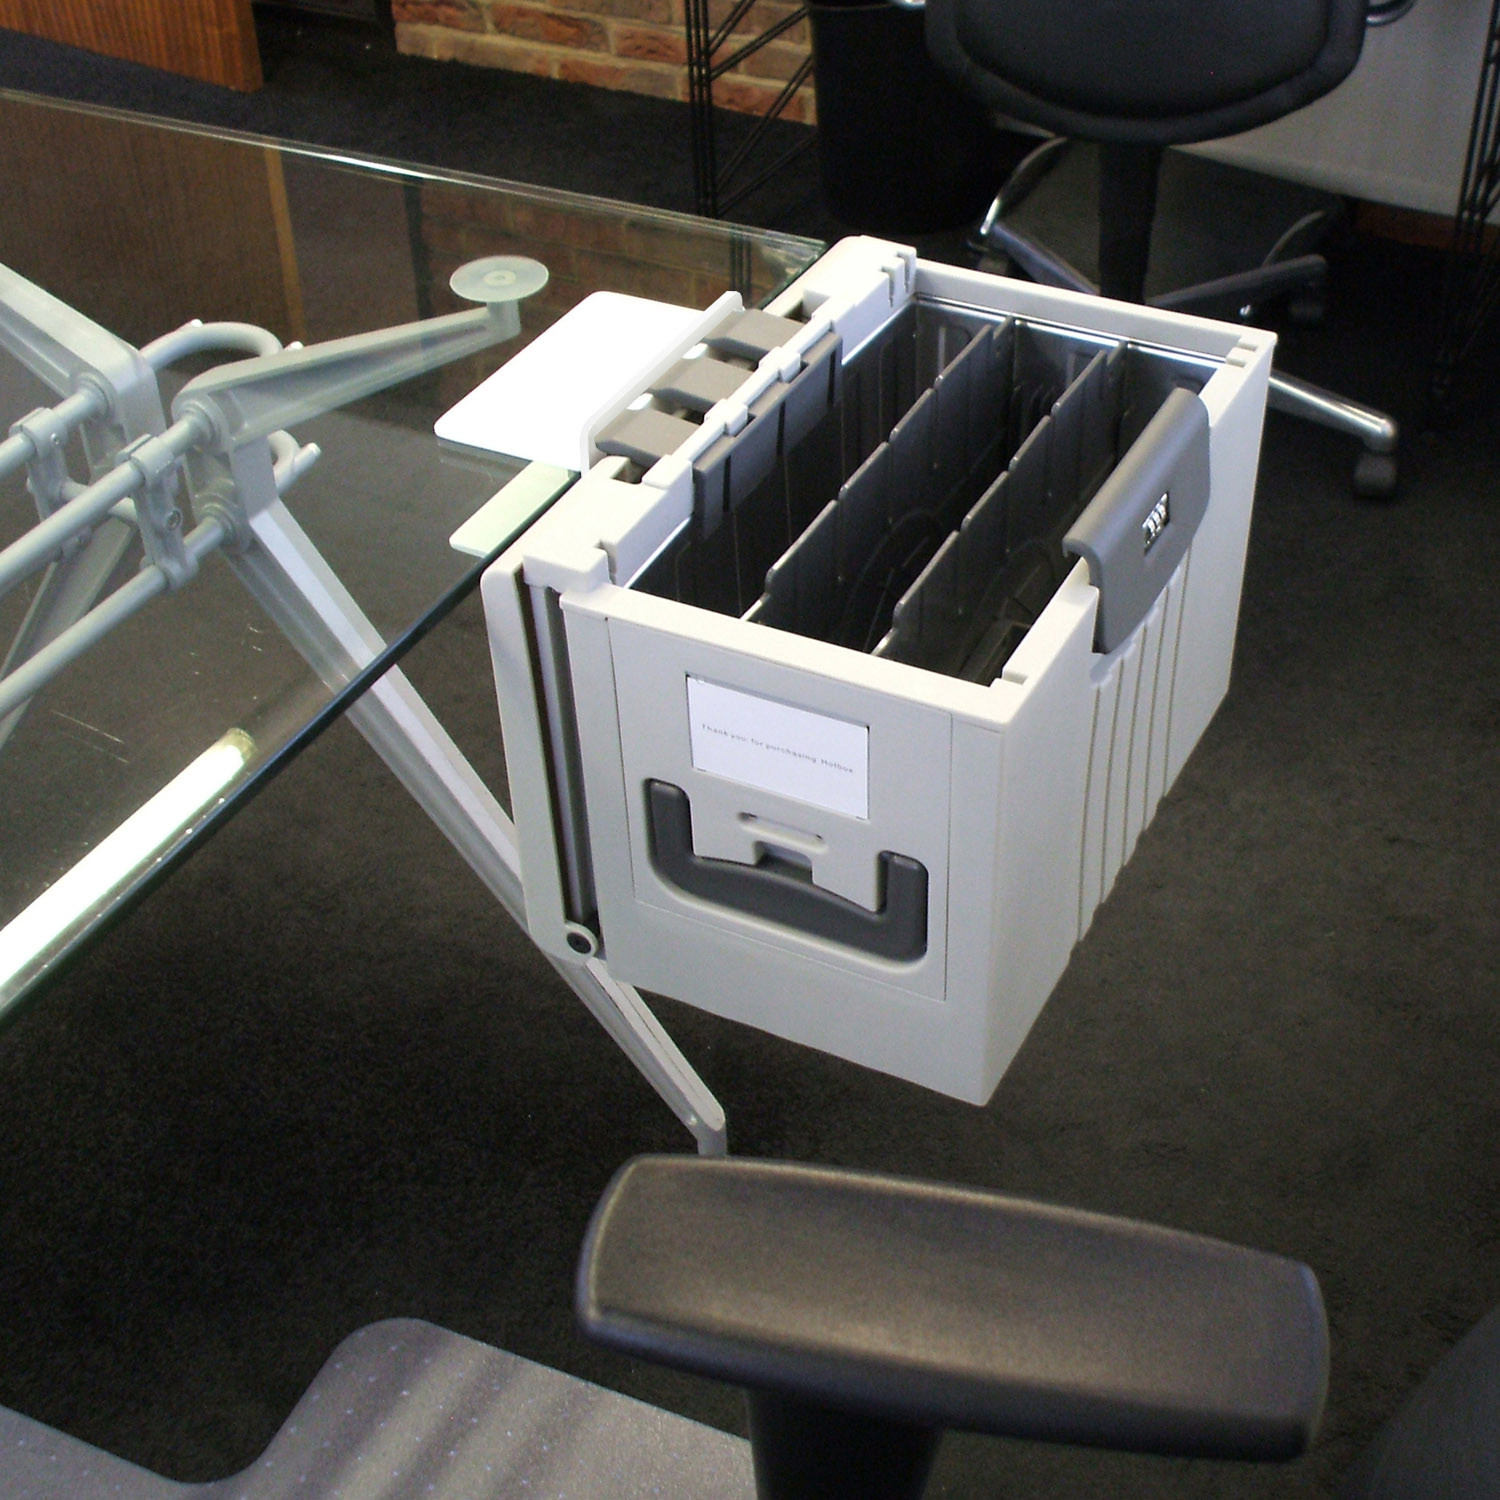 HotBox Storage Latched onto Office Desk